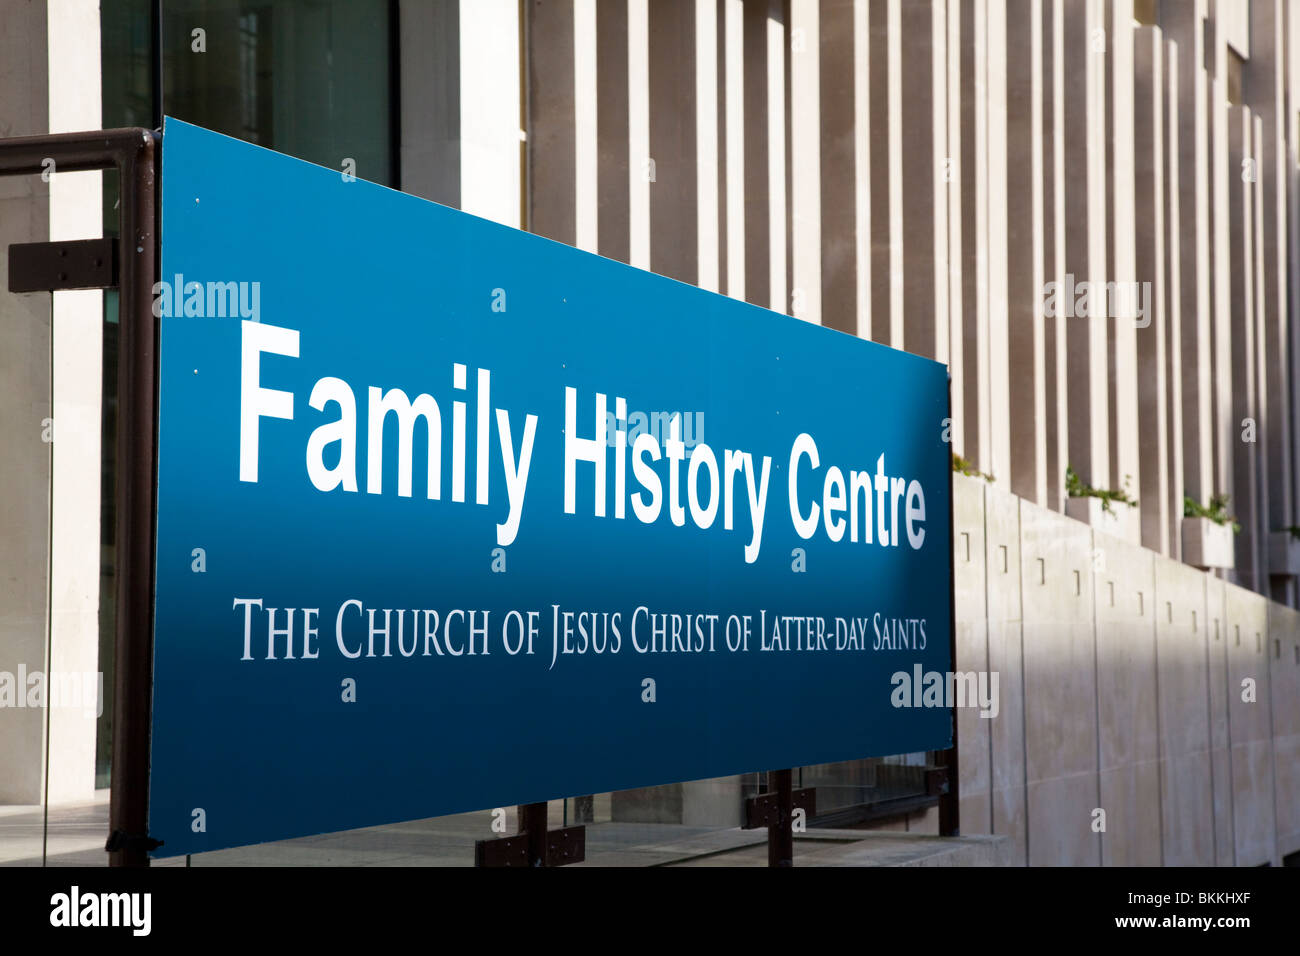 Family History Centre at The Church of Jesus Christ of the Later-day Saints, Exhibition Road, London UK. Stock Photo